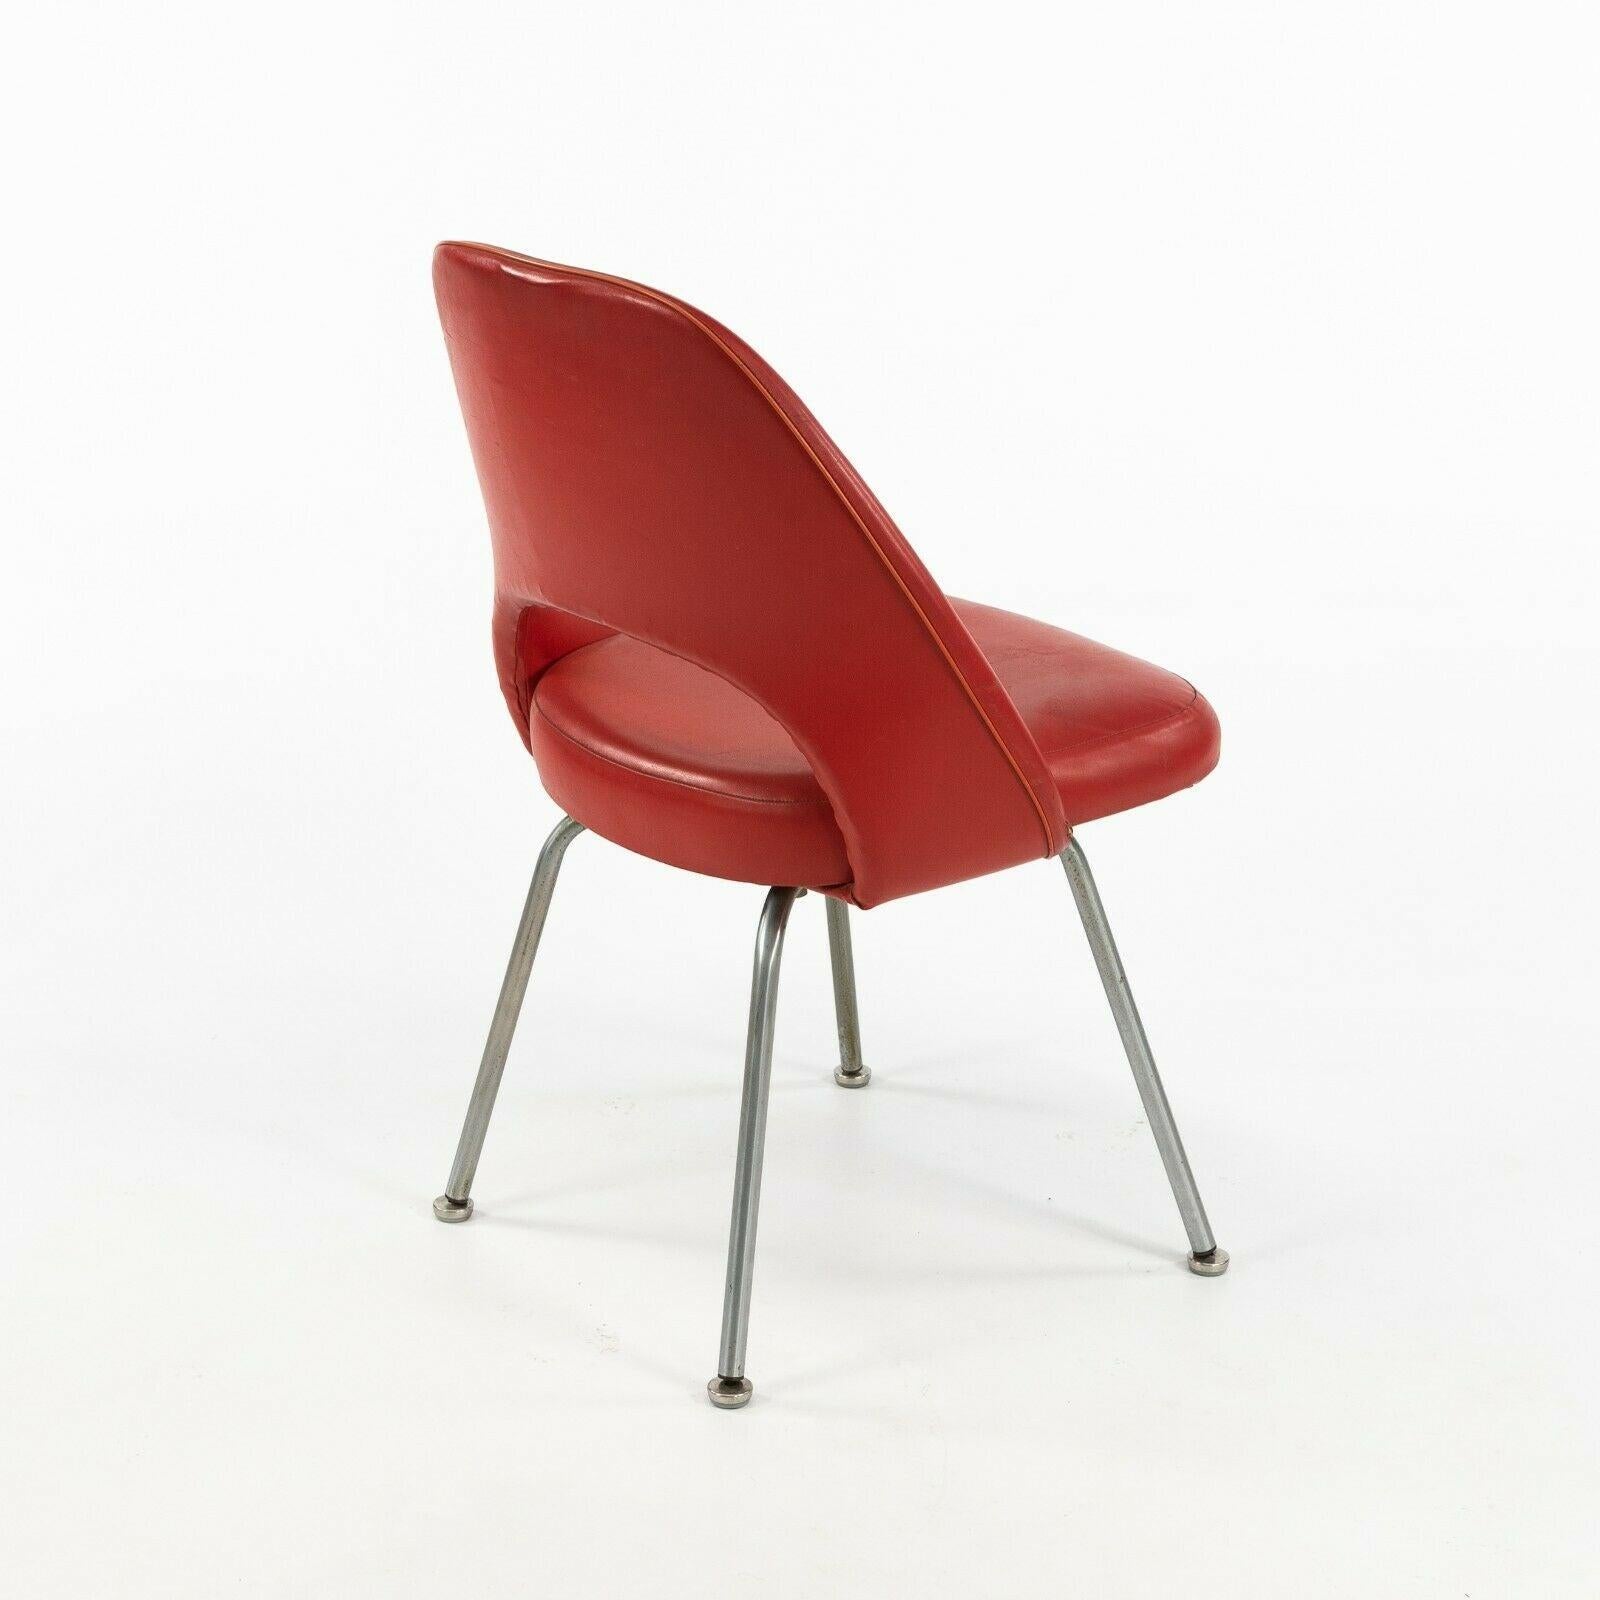 1963 Pair of Eero Saarinen for Knoll Red Vinyl Armless Executive Dining Chairs For Sale 1